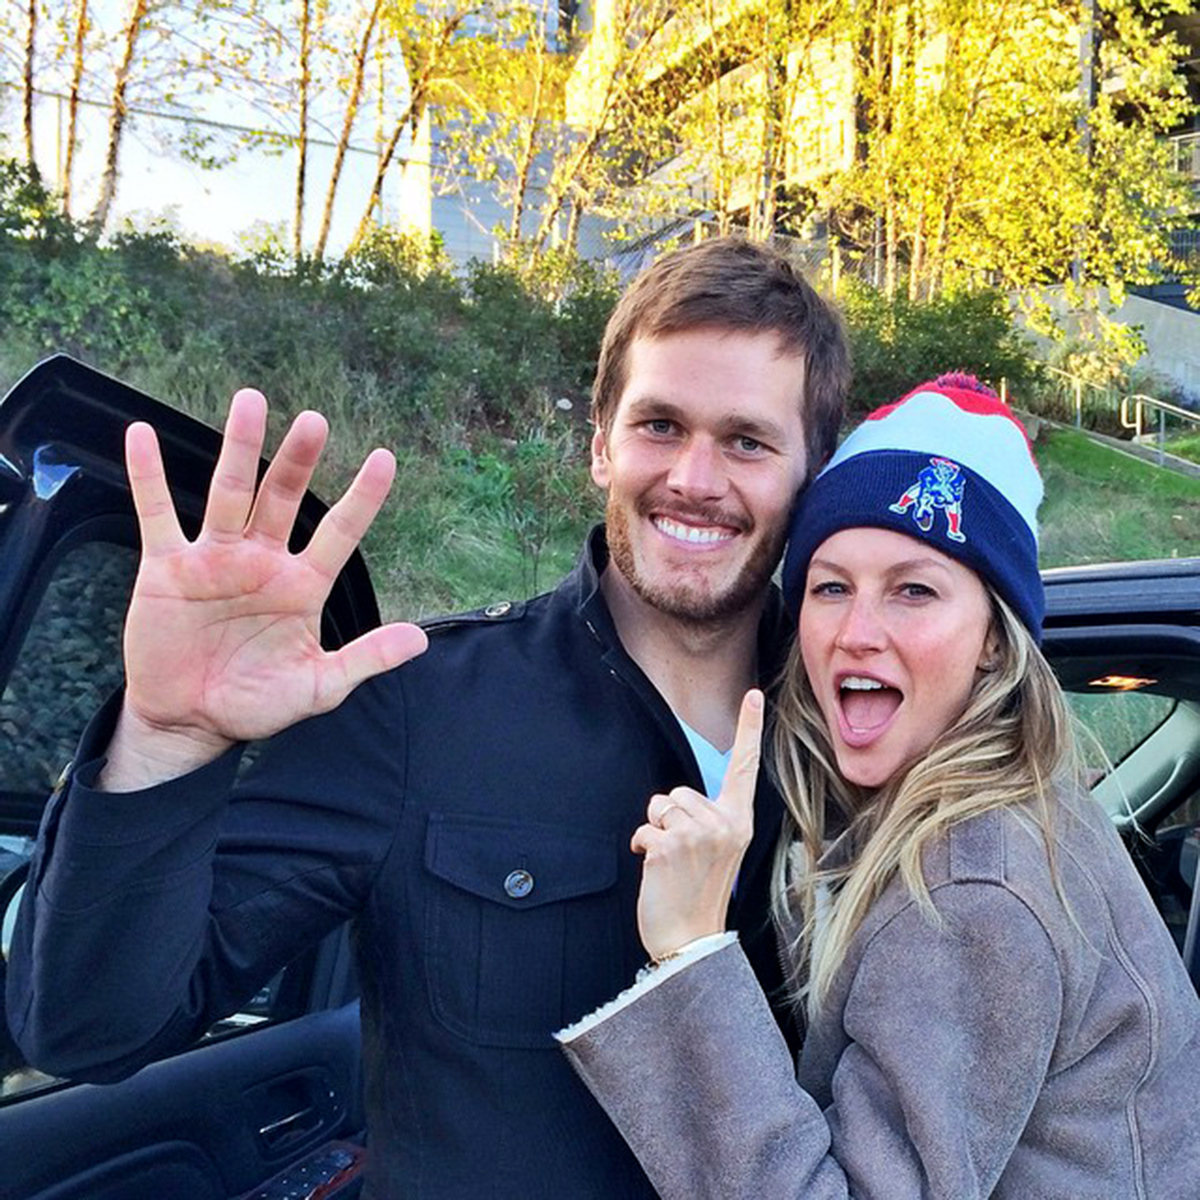 PHOTO: Gisele Bundchen shared this image of her with husband Tom Brady to her Instagram captioned; "So happy for my love!!! Go Pats!!! 51 points!!!"